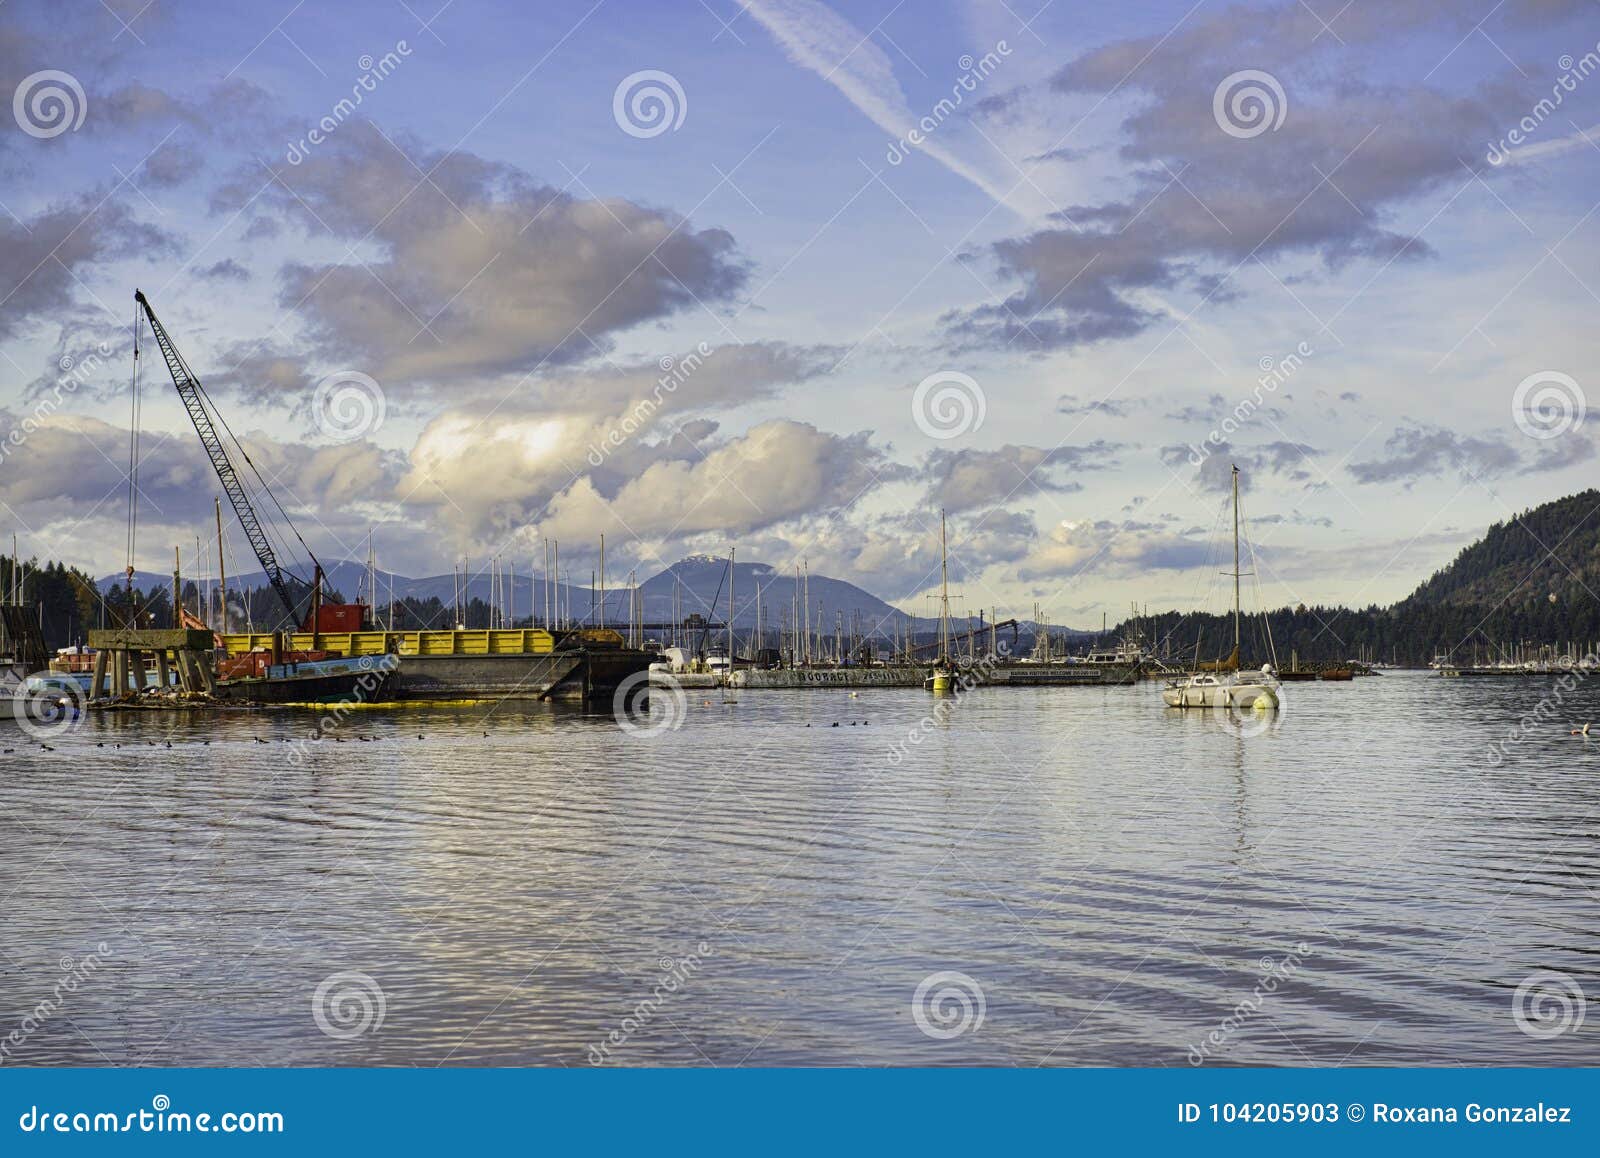 view of ladysmith marina at sunset, taken in vancouver island, b